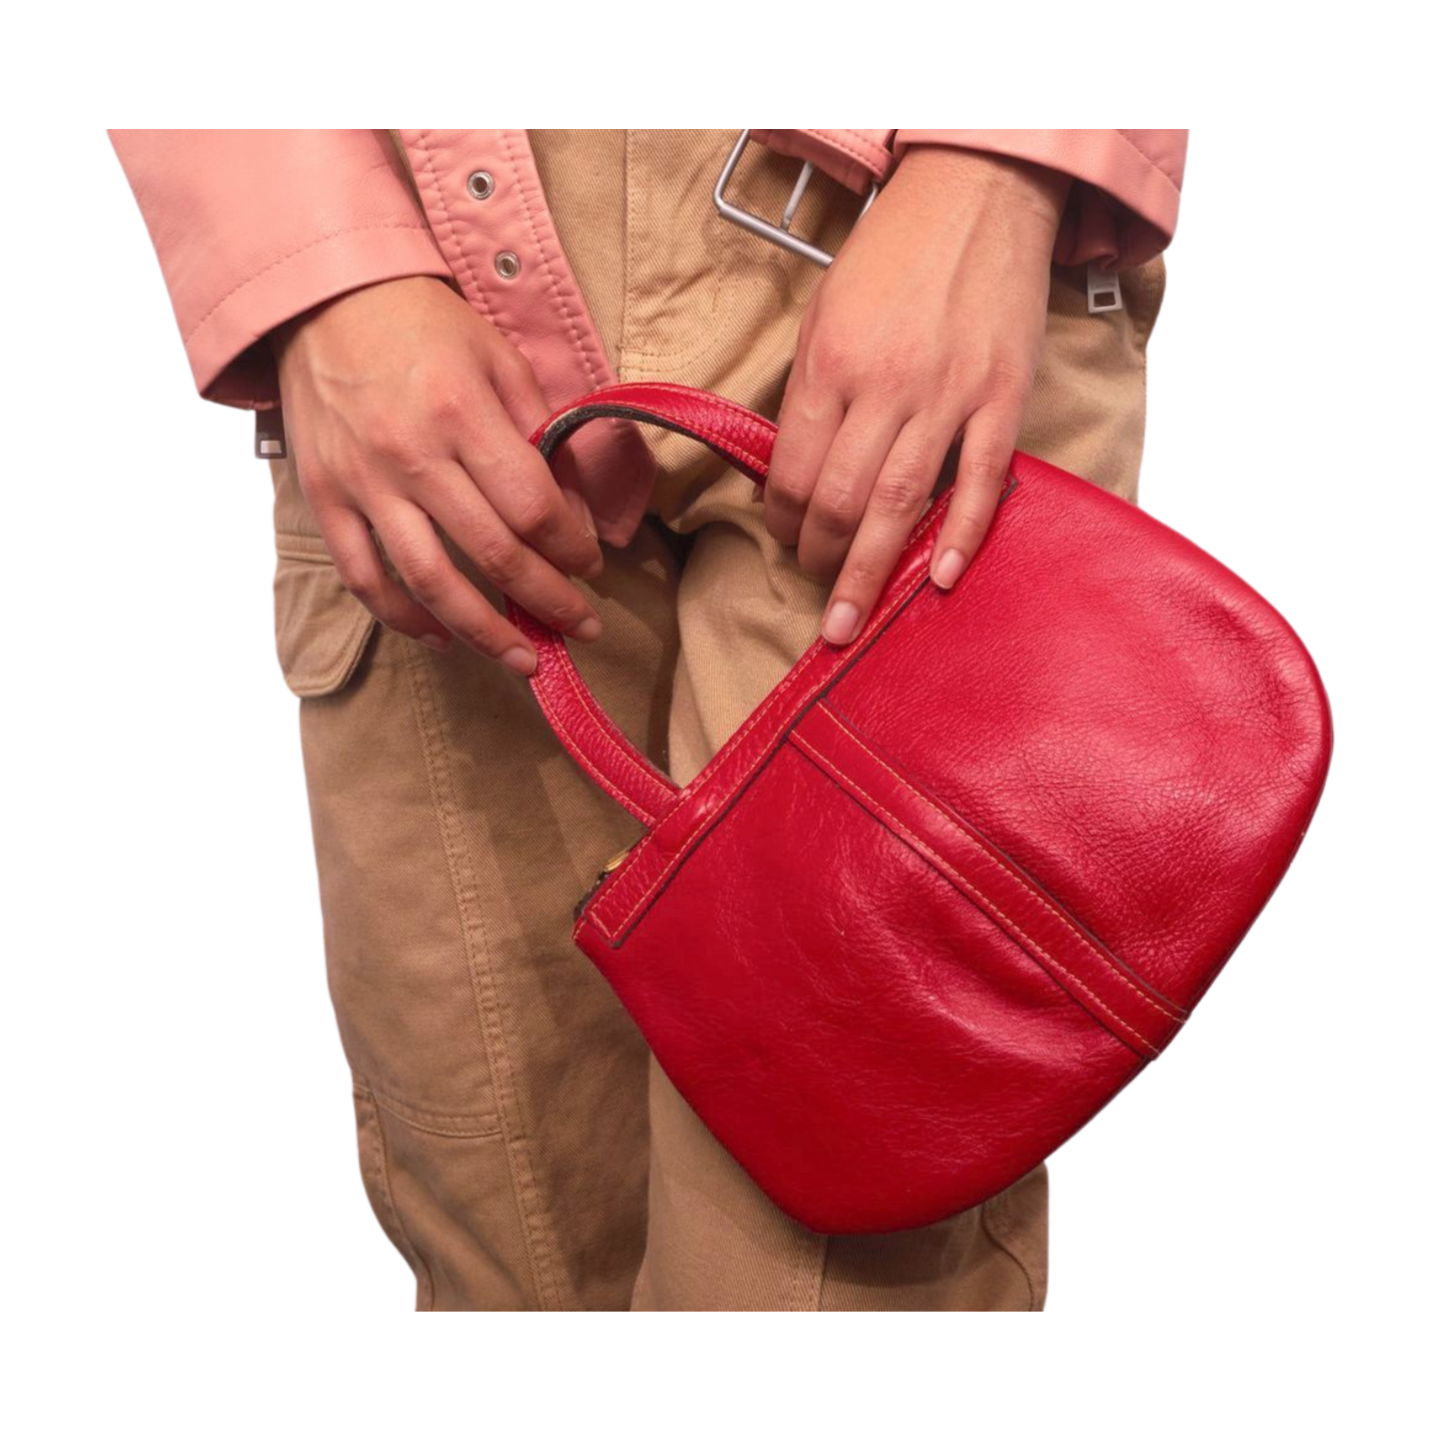 Vintage 1960s Red Leather Date Bag